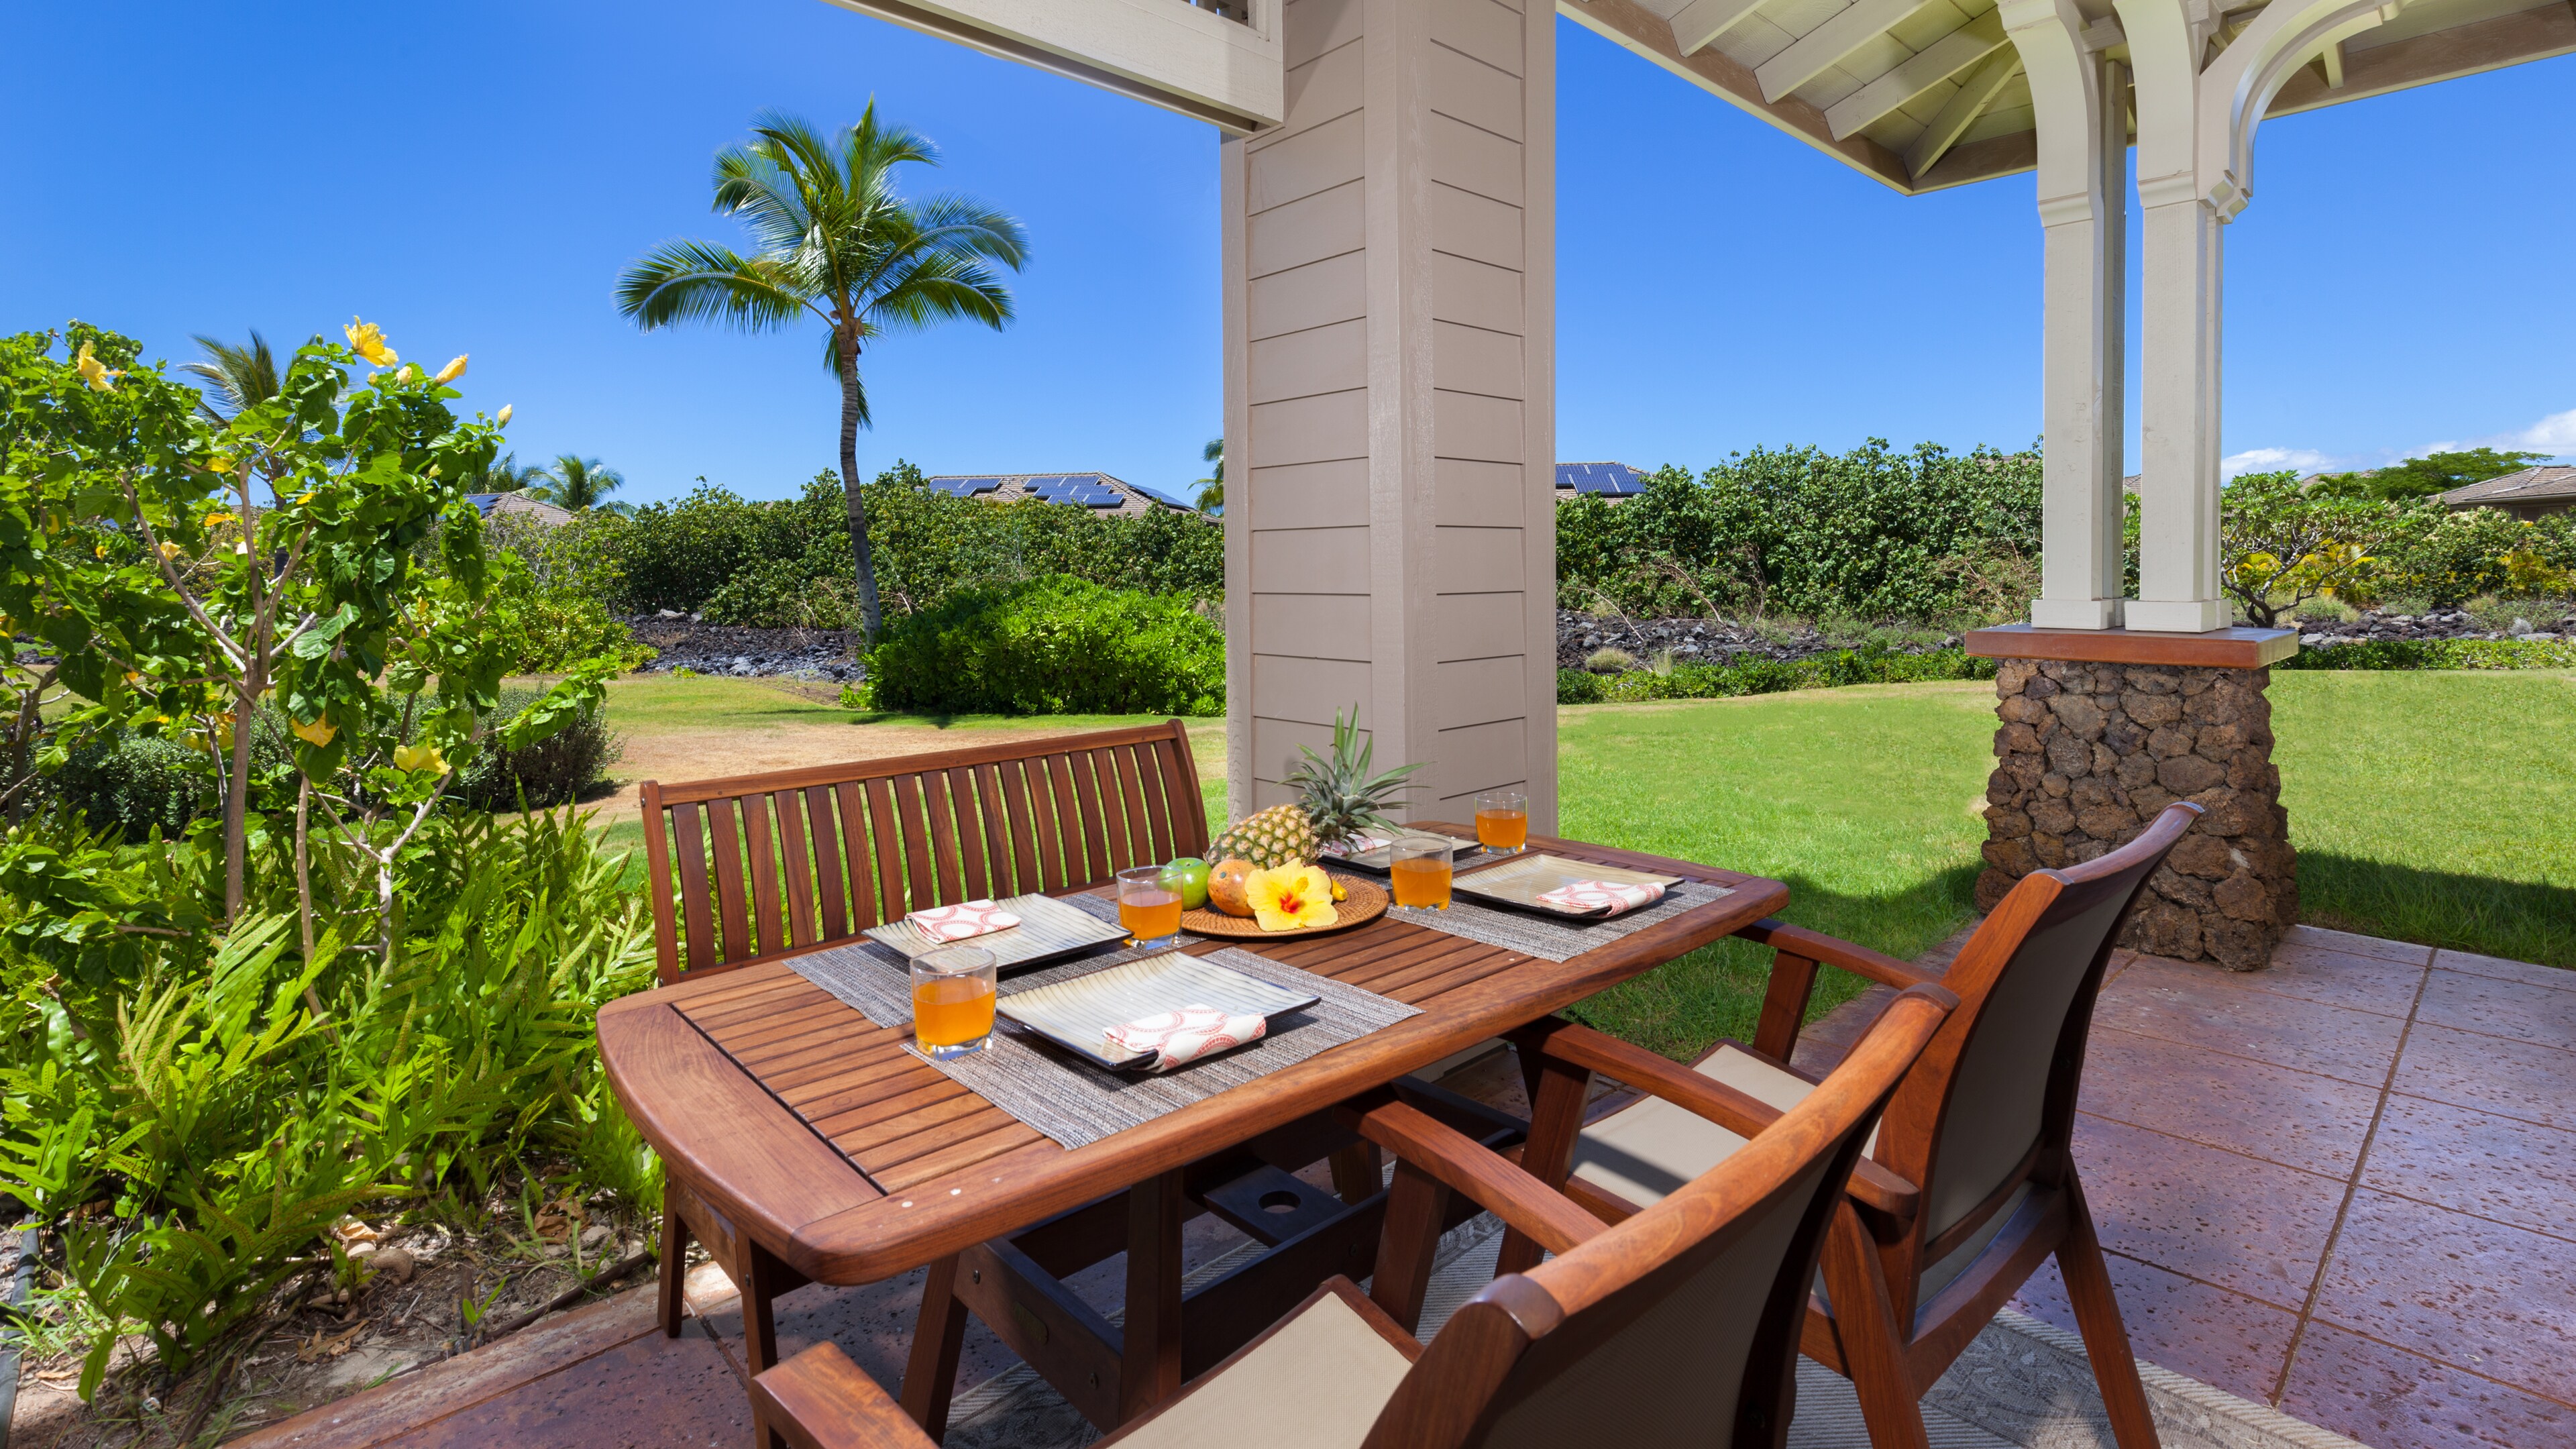 Enjoy privacy on the covered lanai